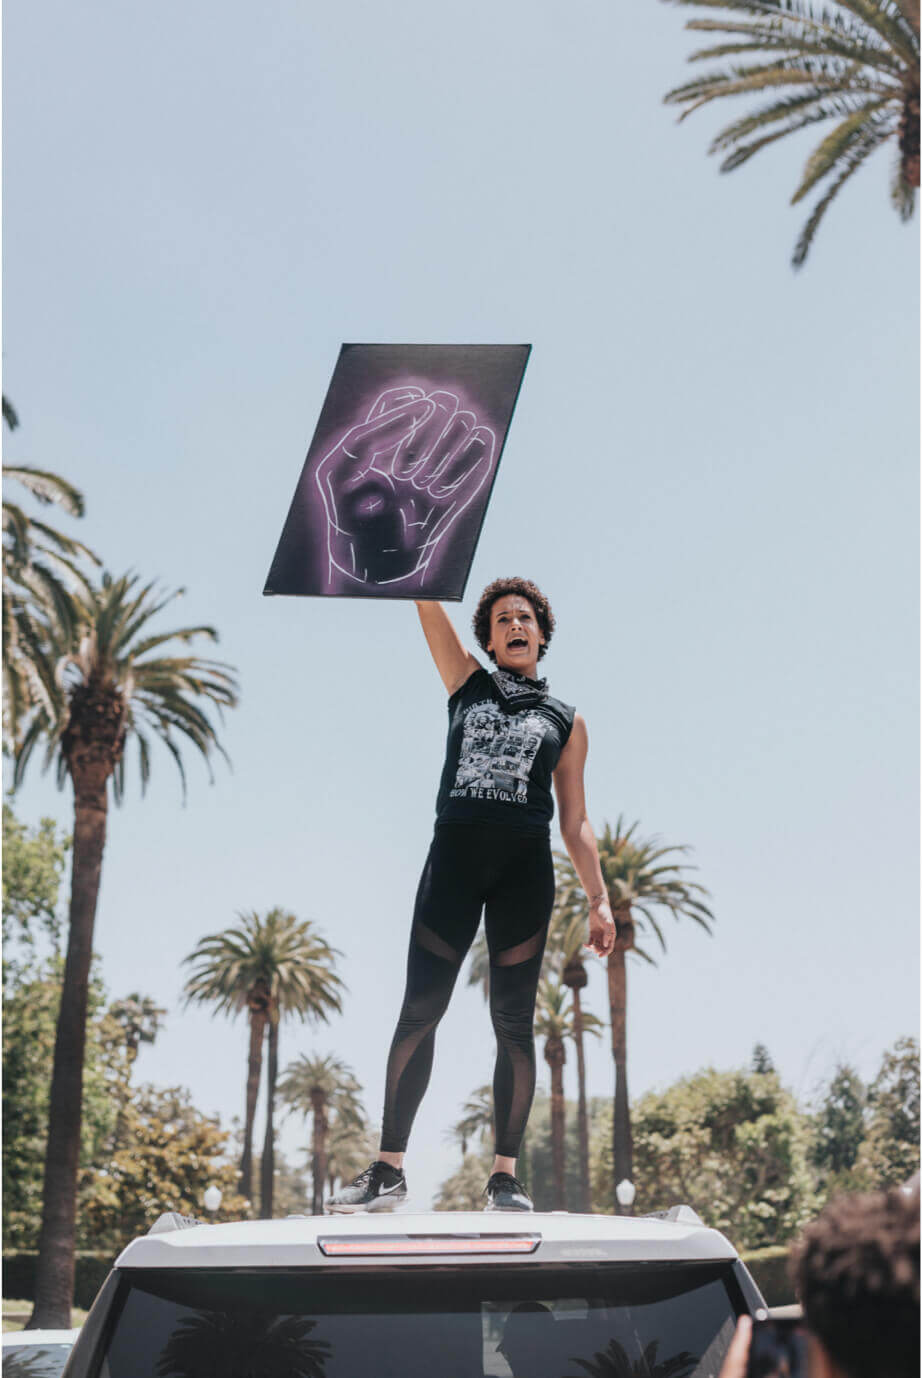 An activist standing on a car holding up a black sign with a purple outline of a fist